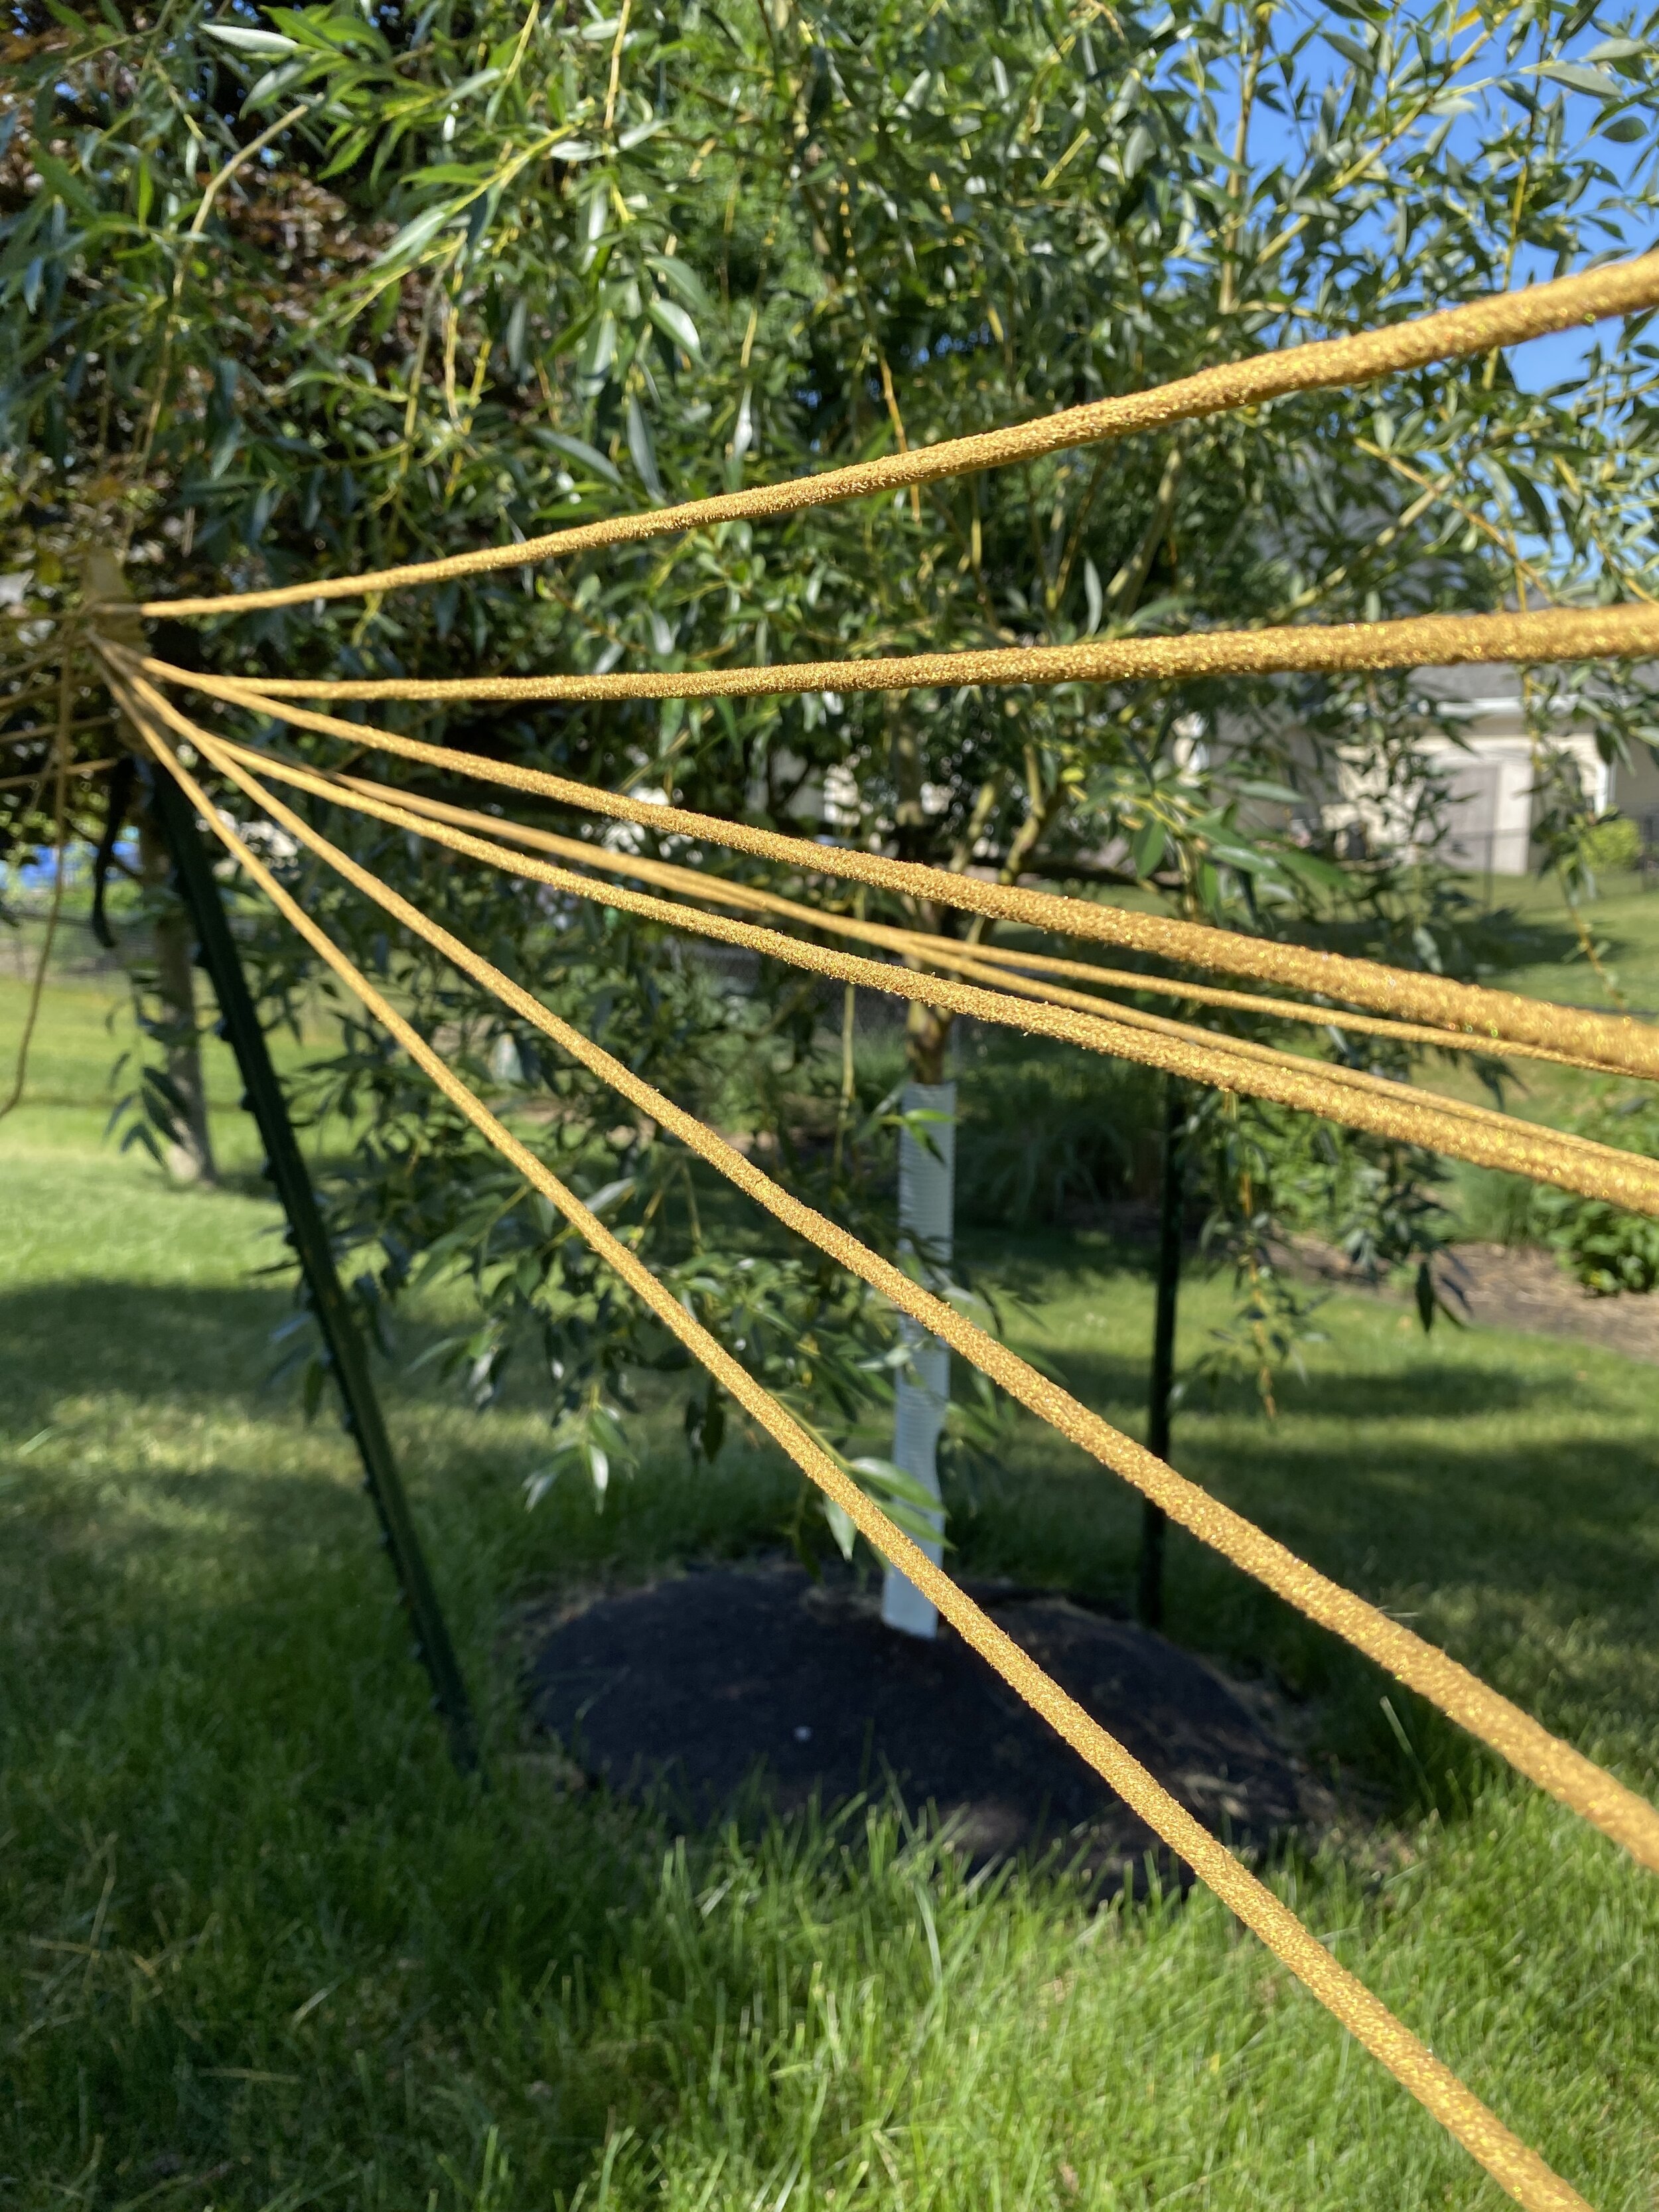 Drying Dyed Gold Clothesline.JPG